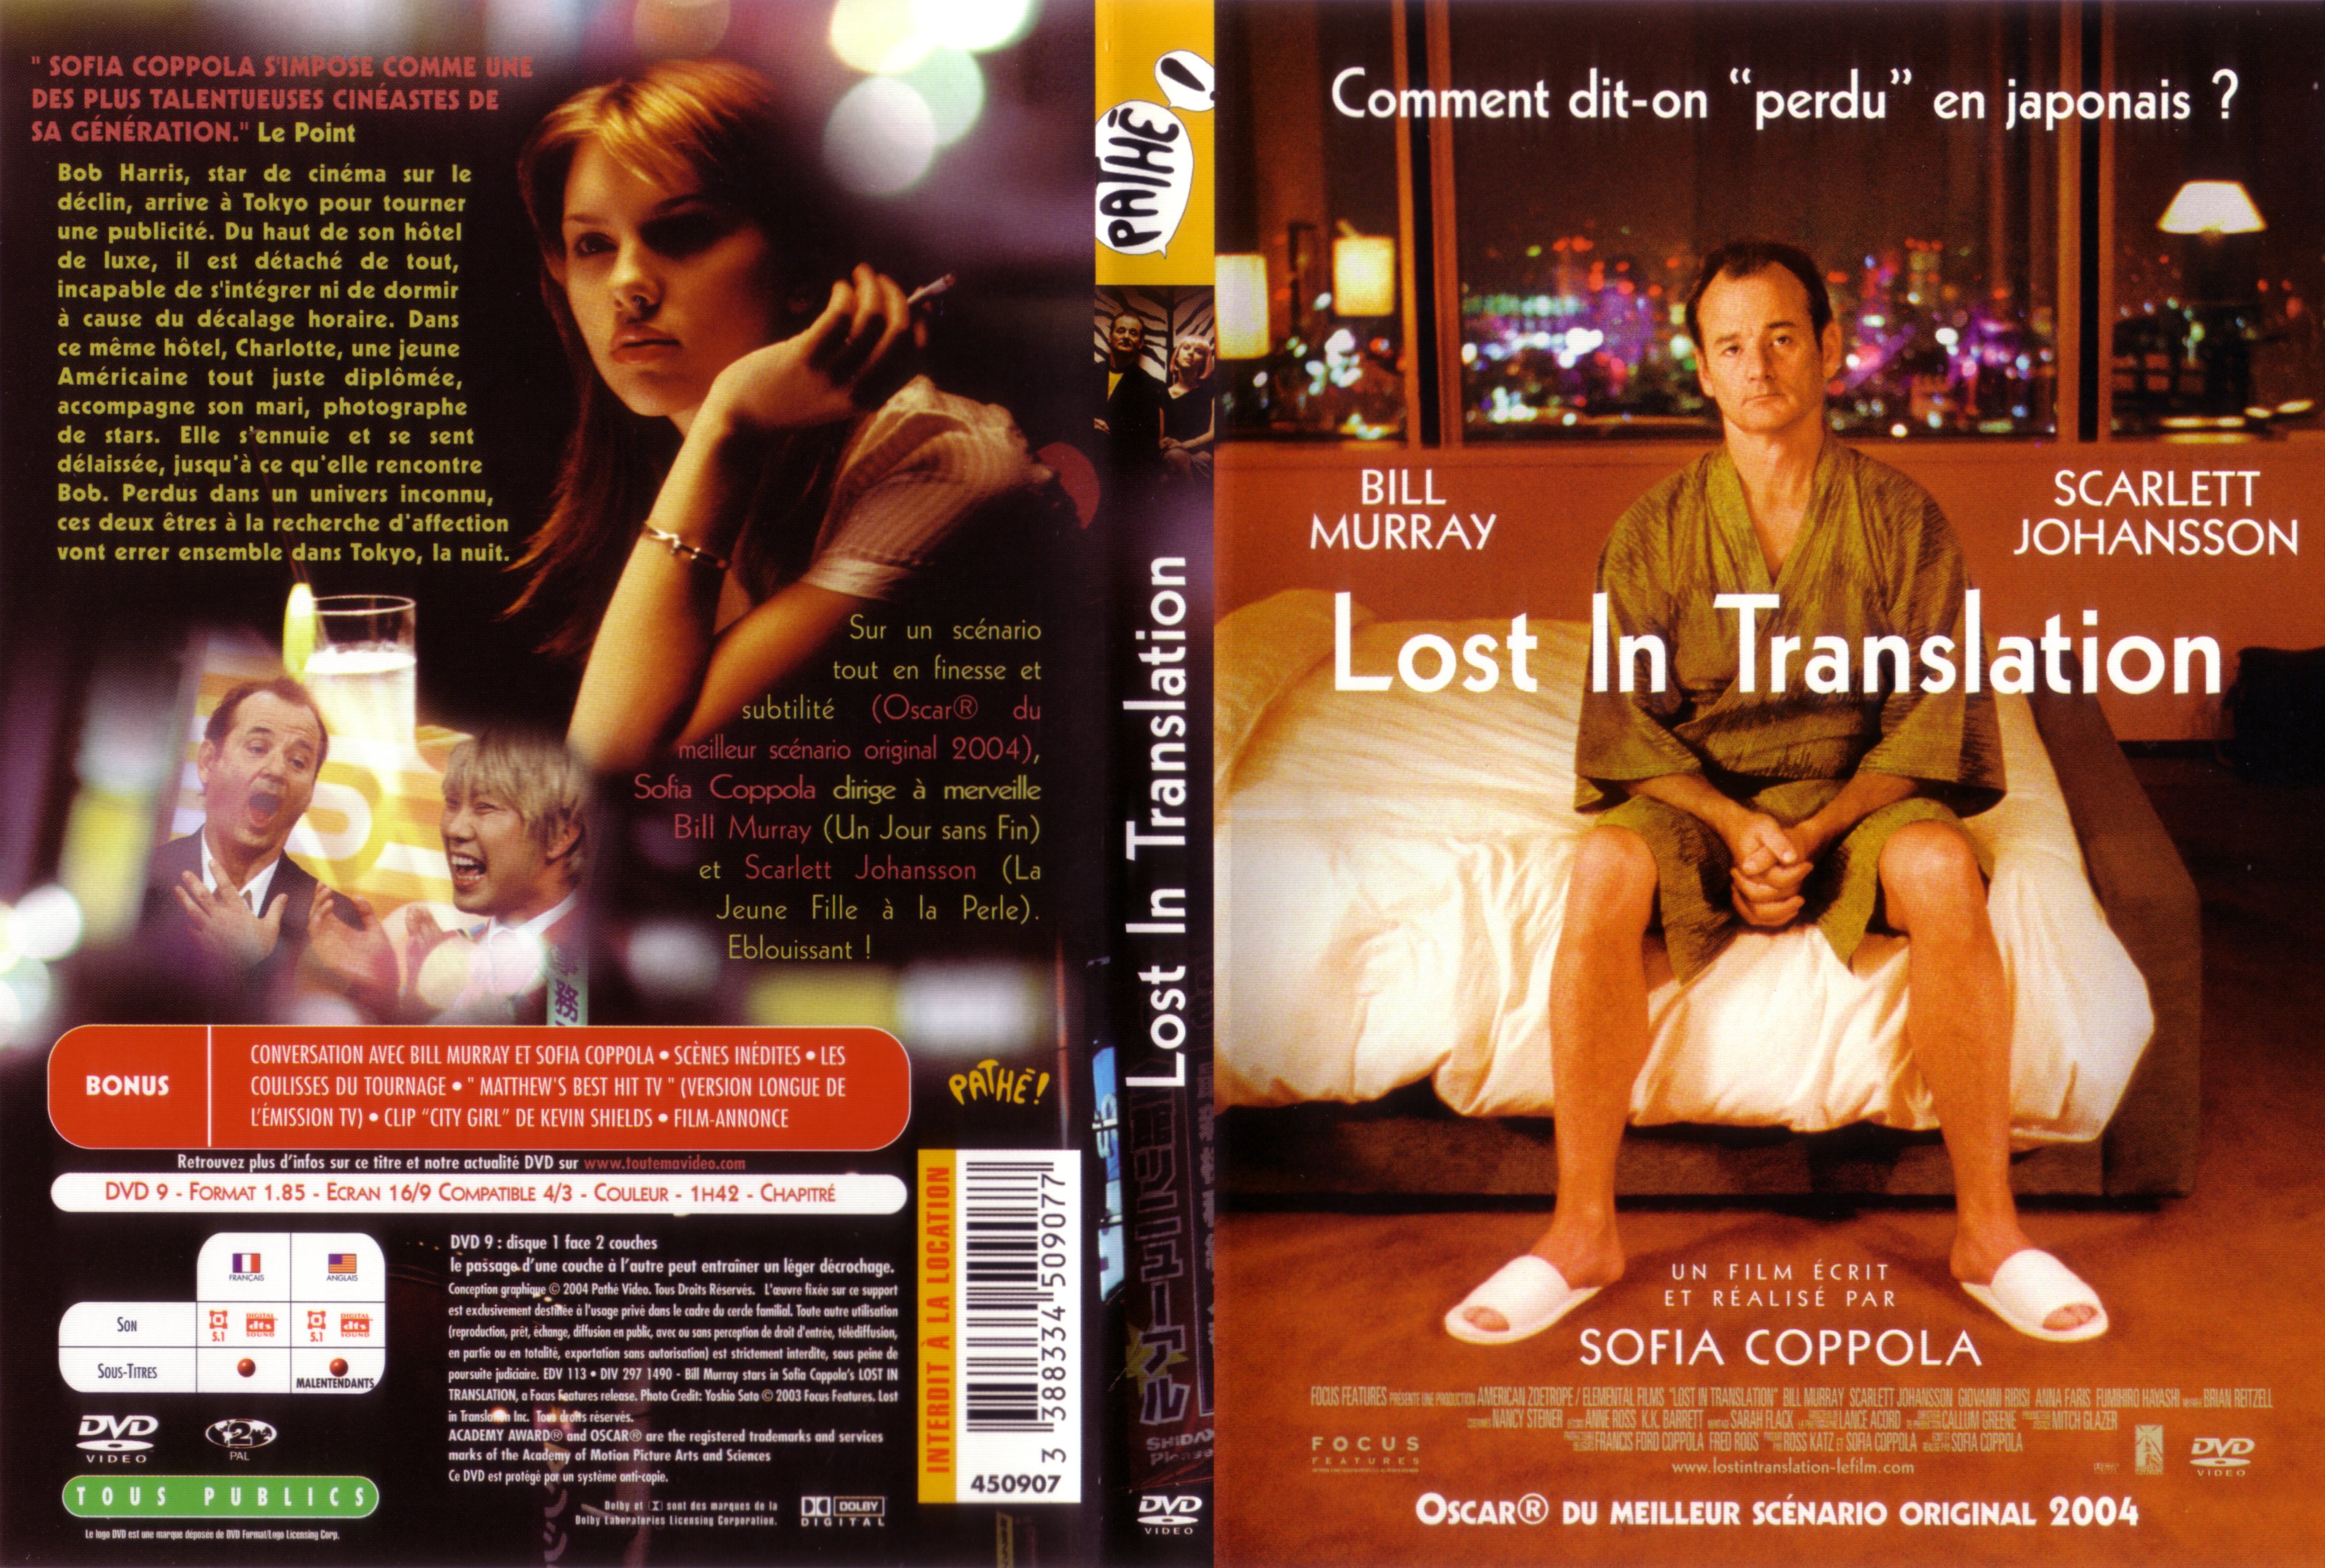 Jaquette DVD Lost in translation